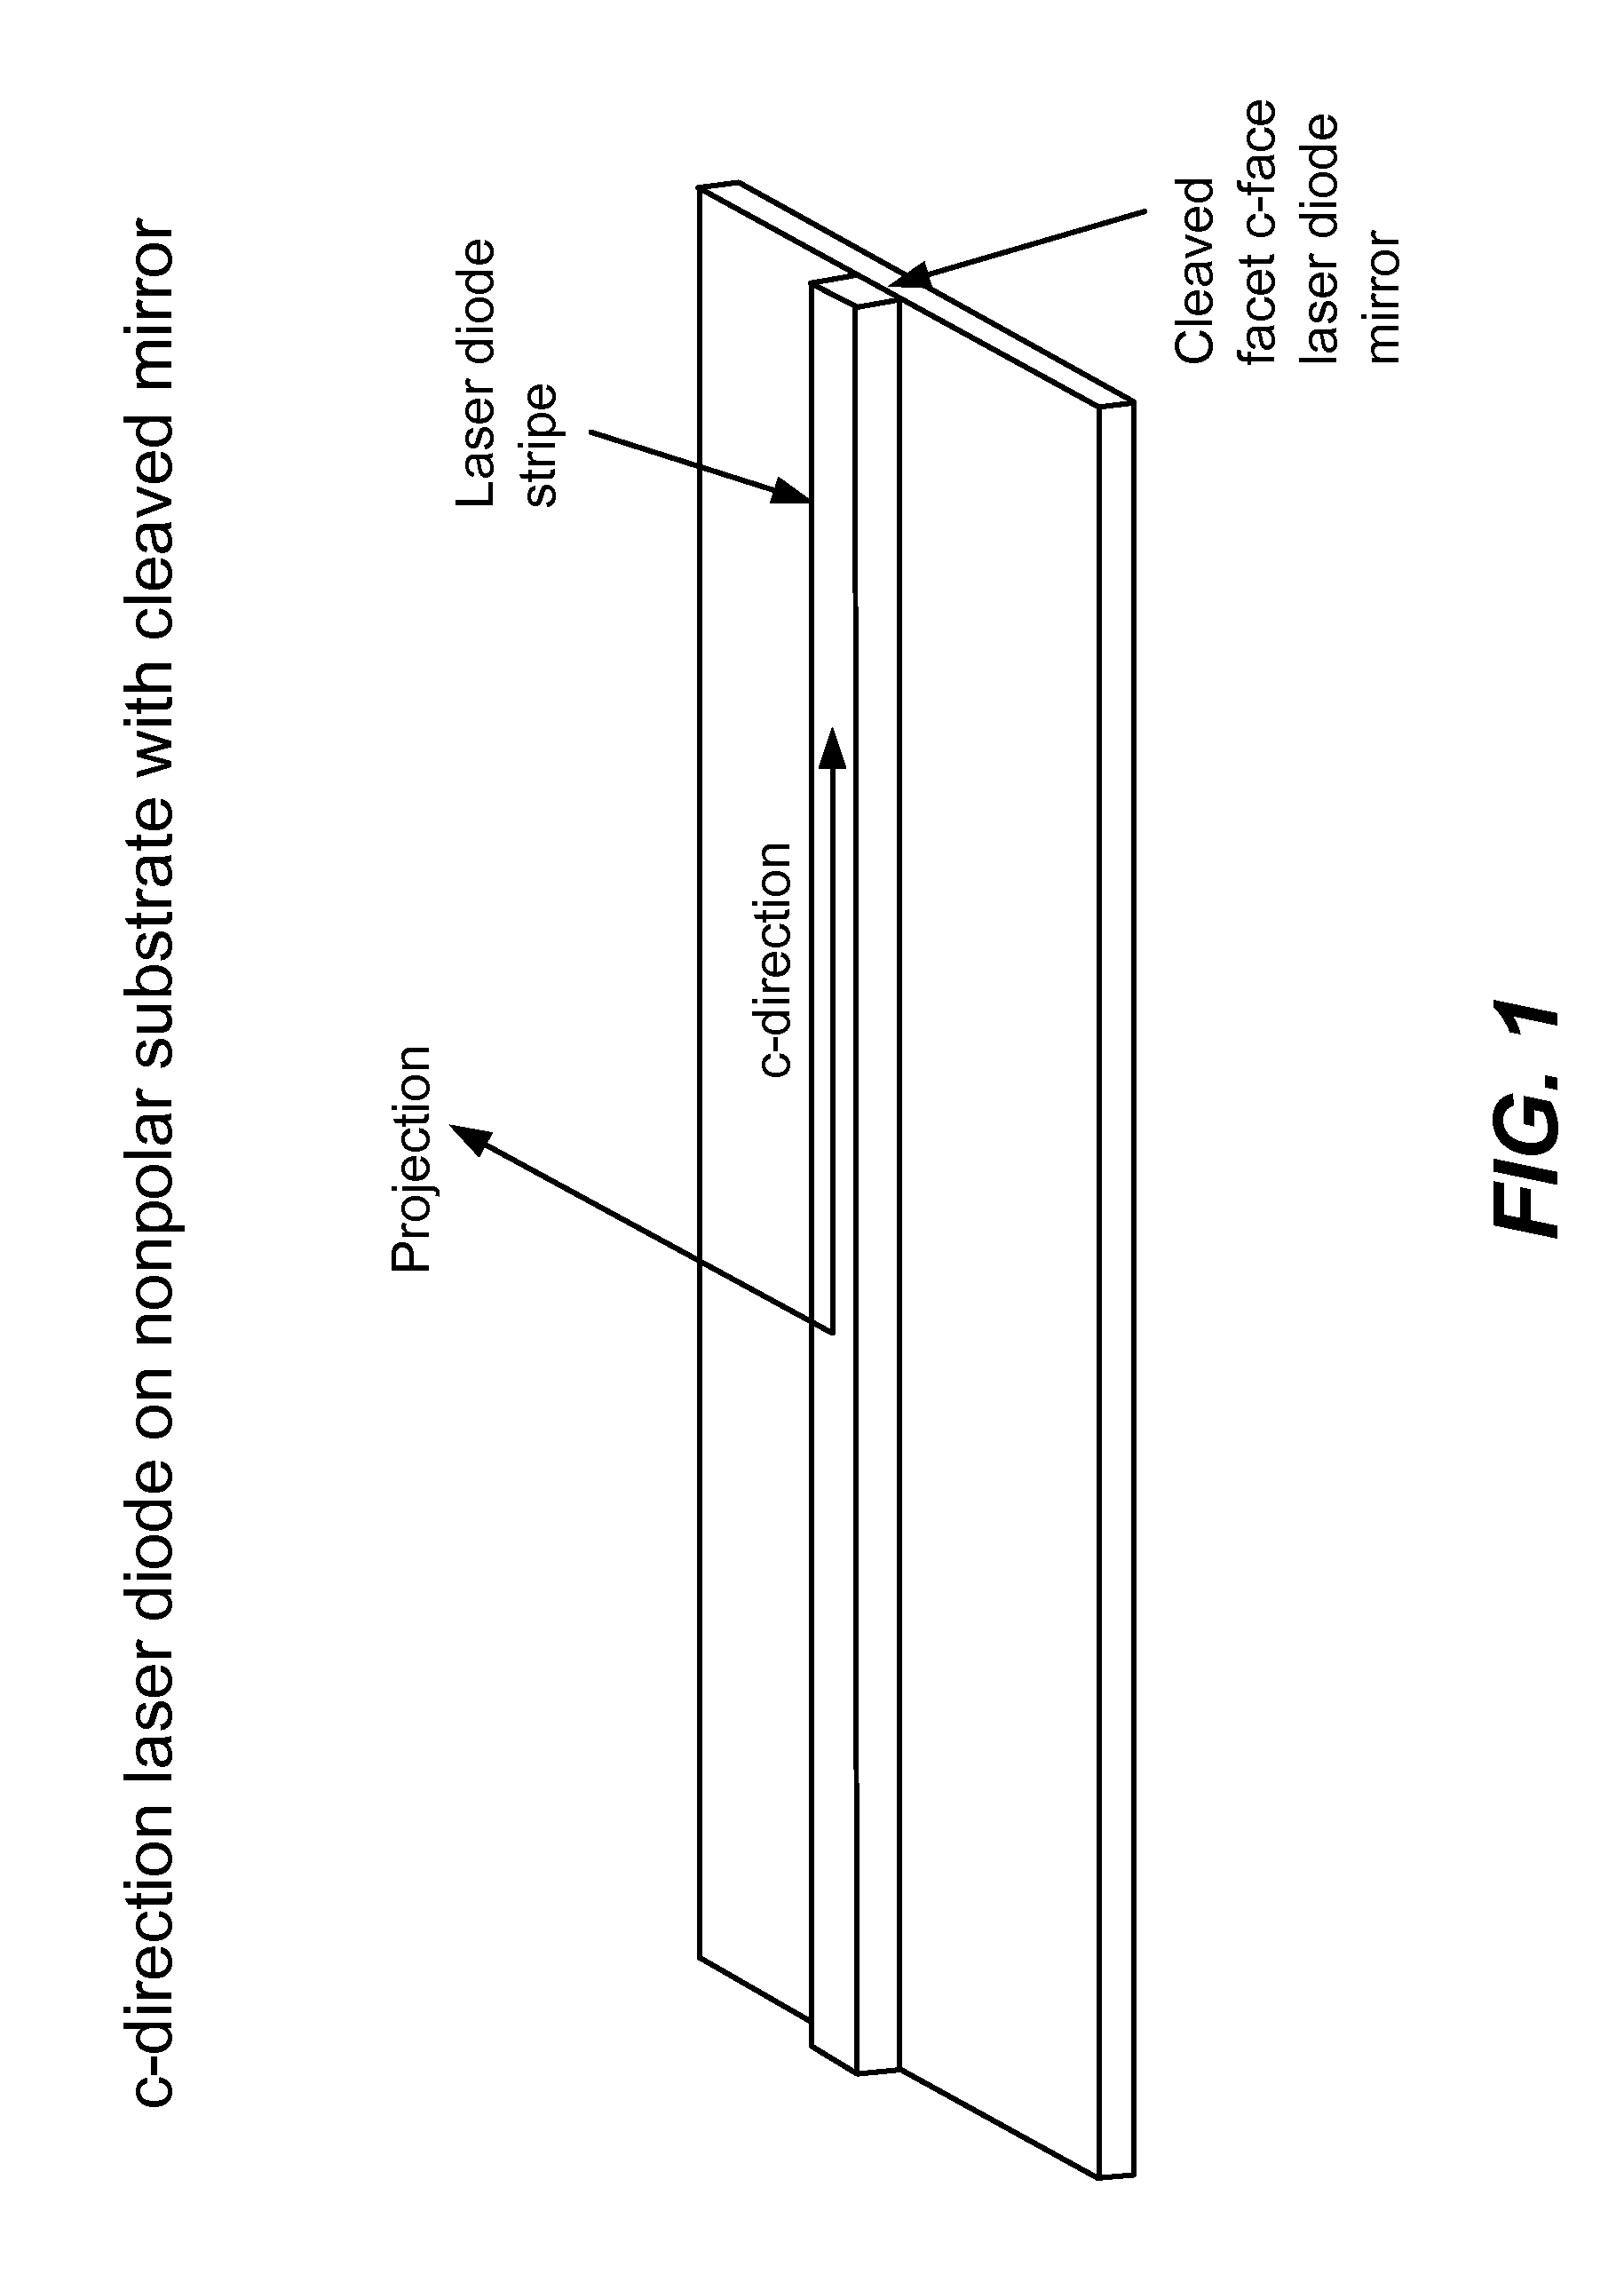 Optical device structure using GaN substrates for laser applications